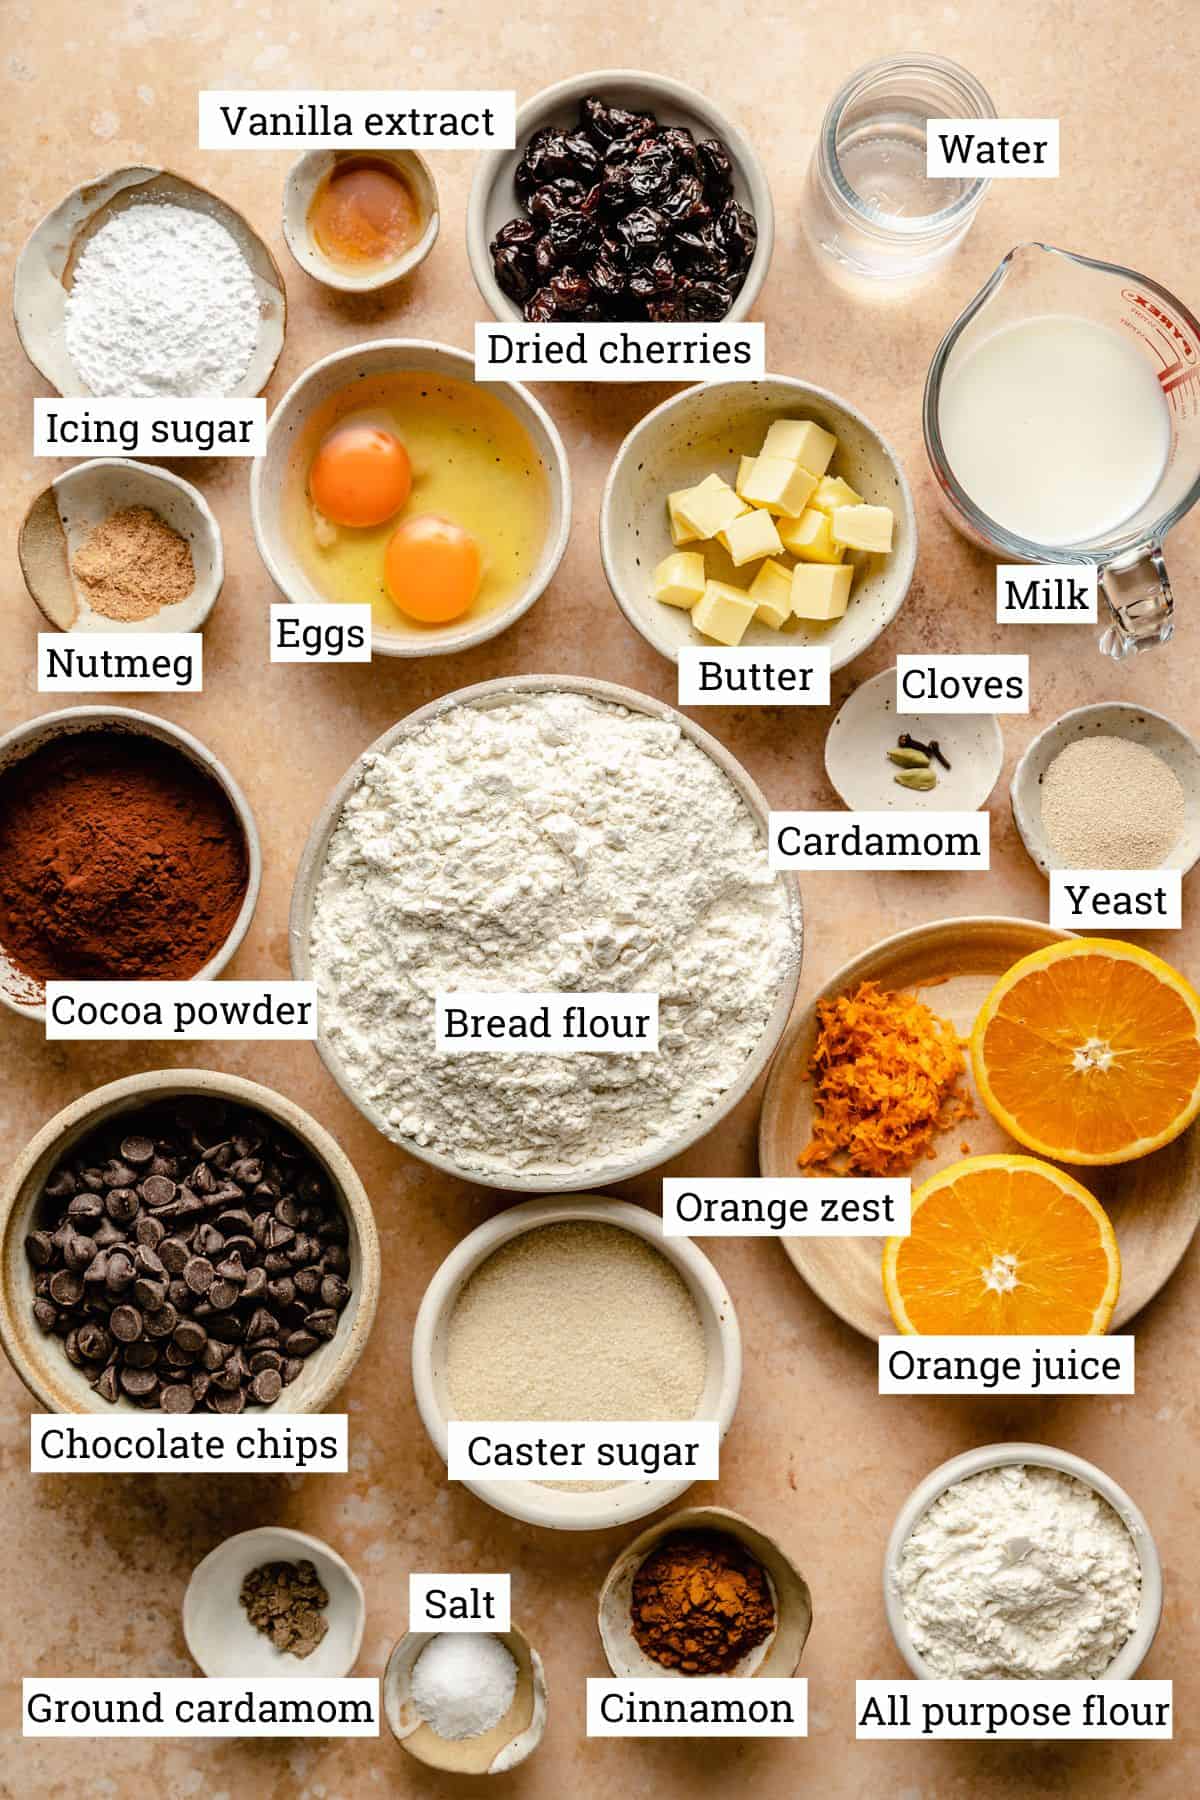 Ingredients for chocolate hot cross buns in various bowls on a surface with labels.